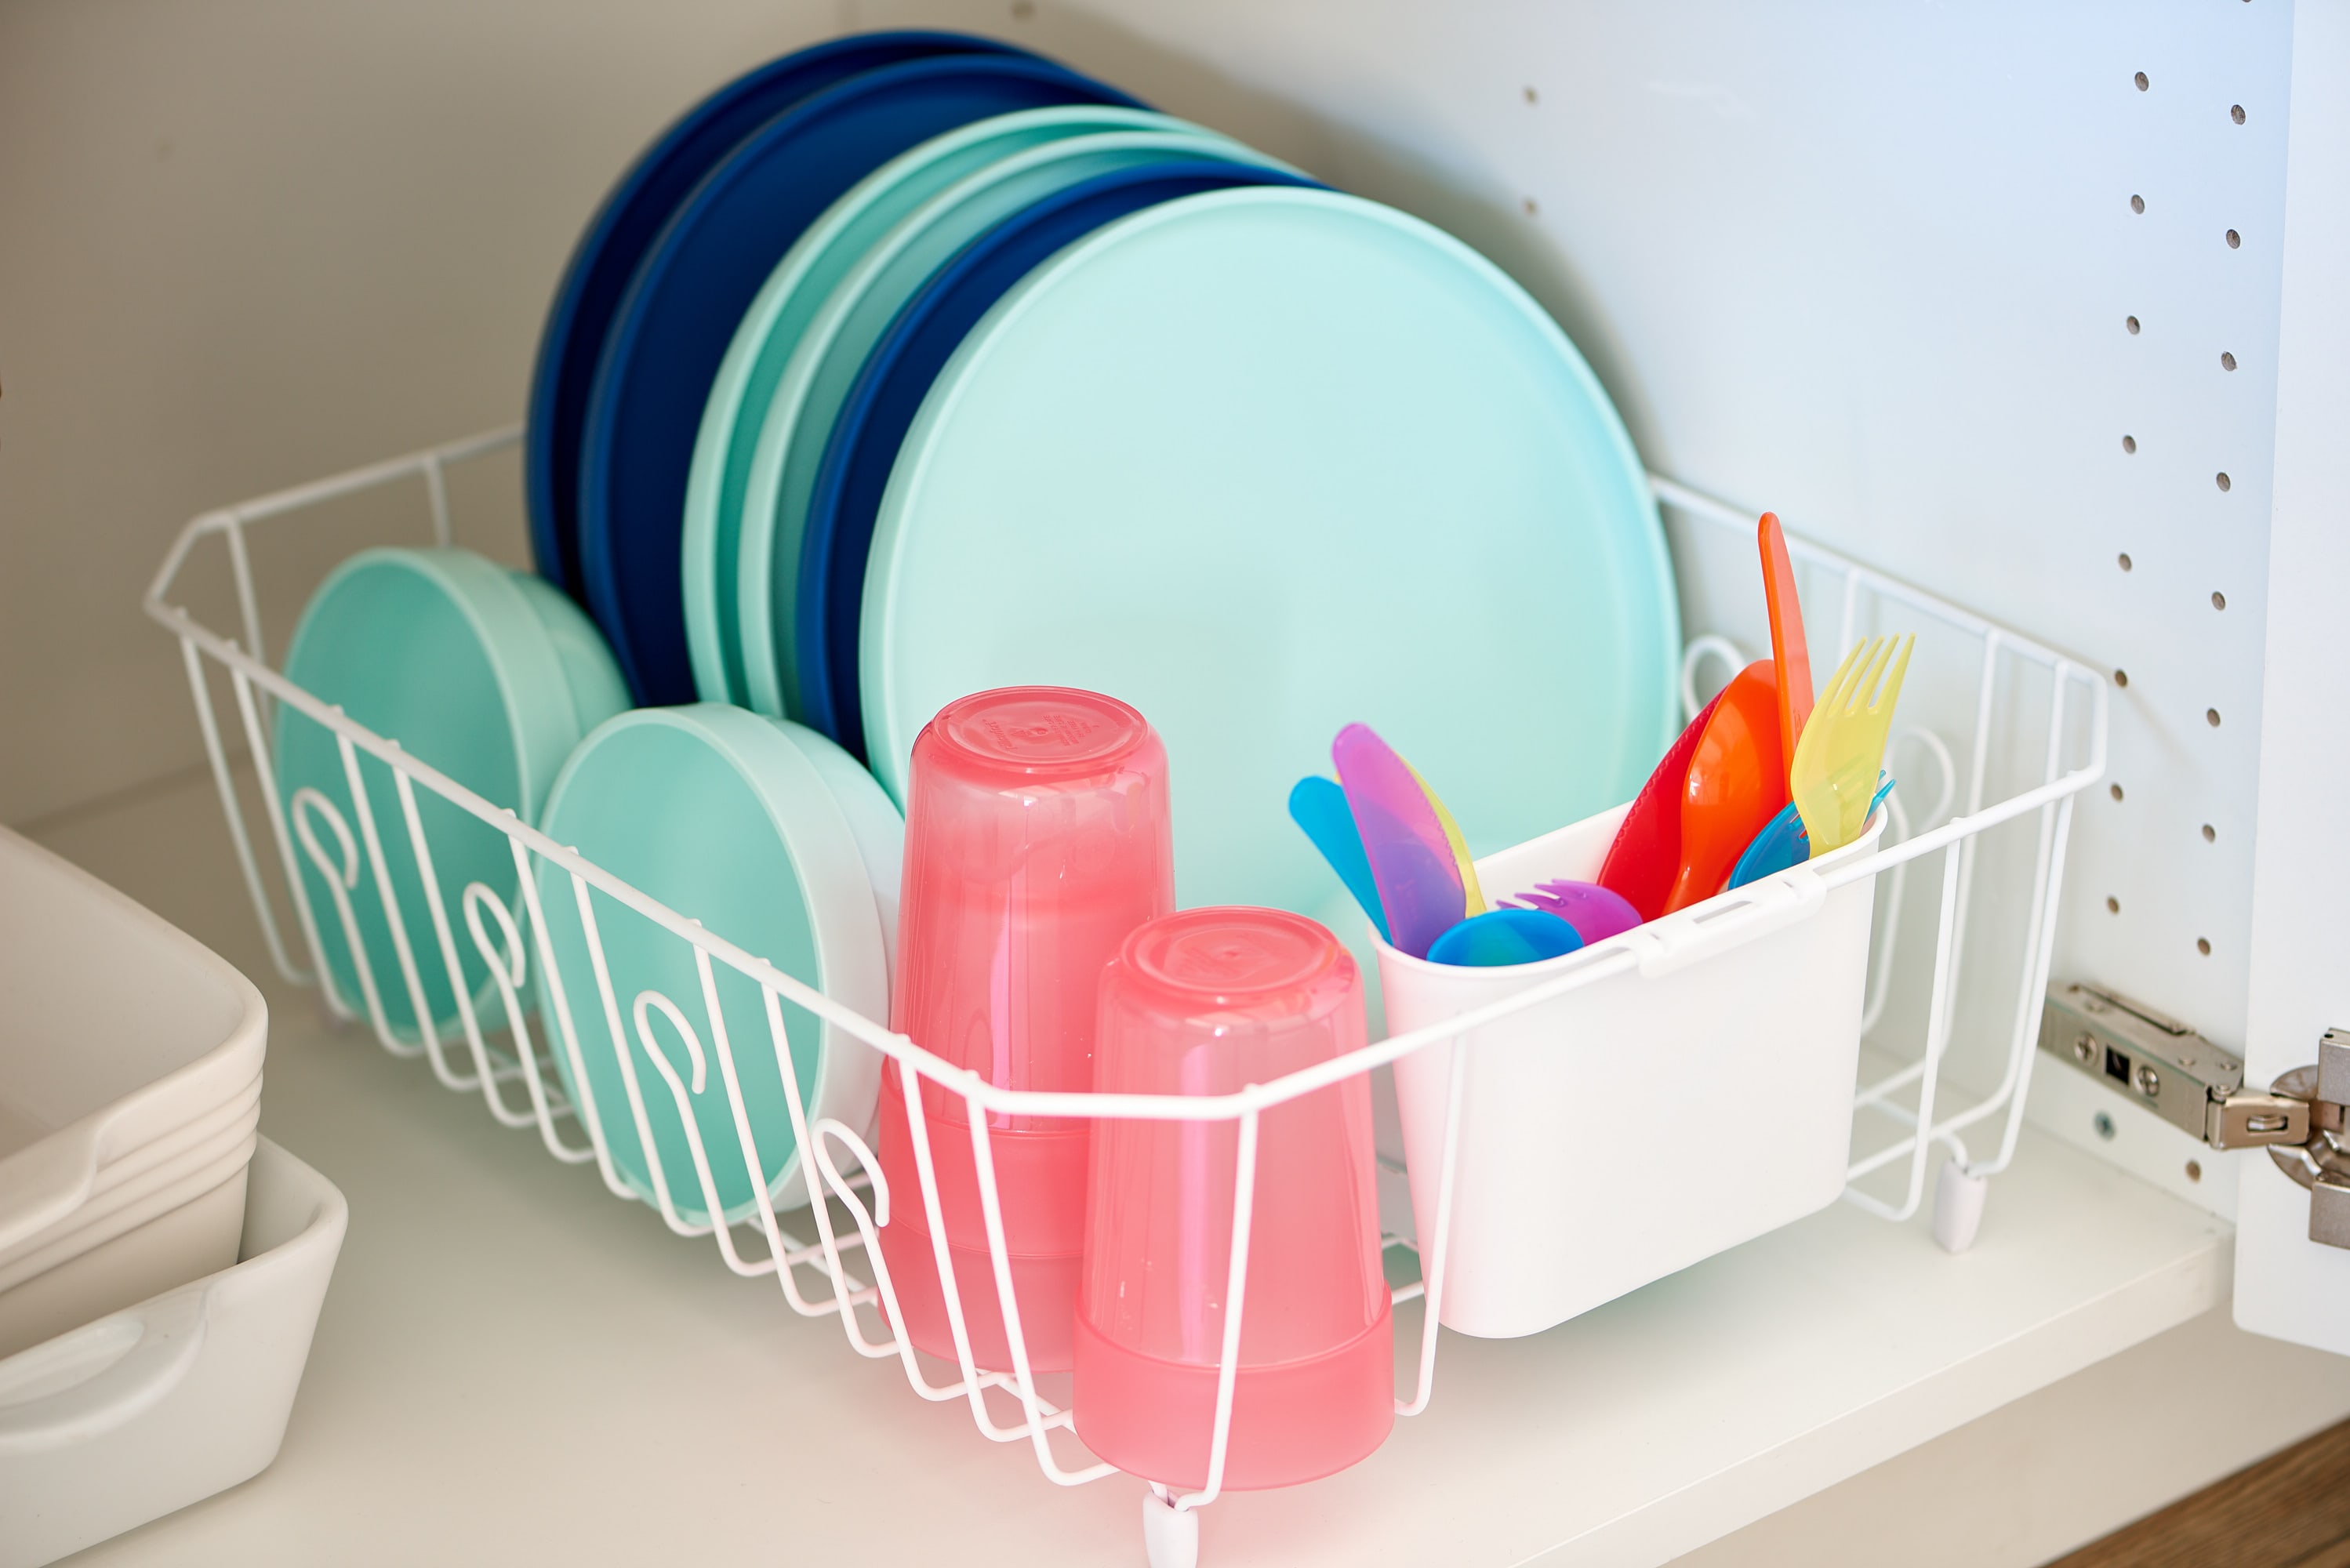 How to Organize Kids' Dishes In A Drawer - Small Stuff Counts